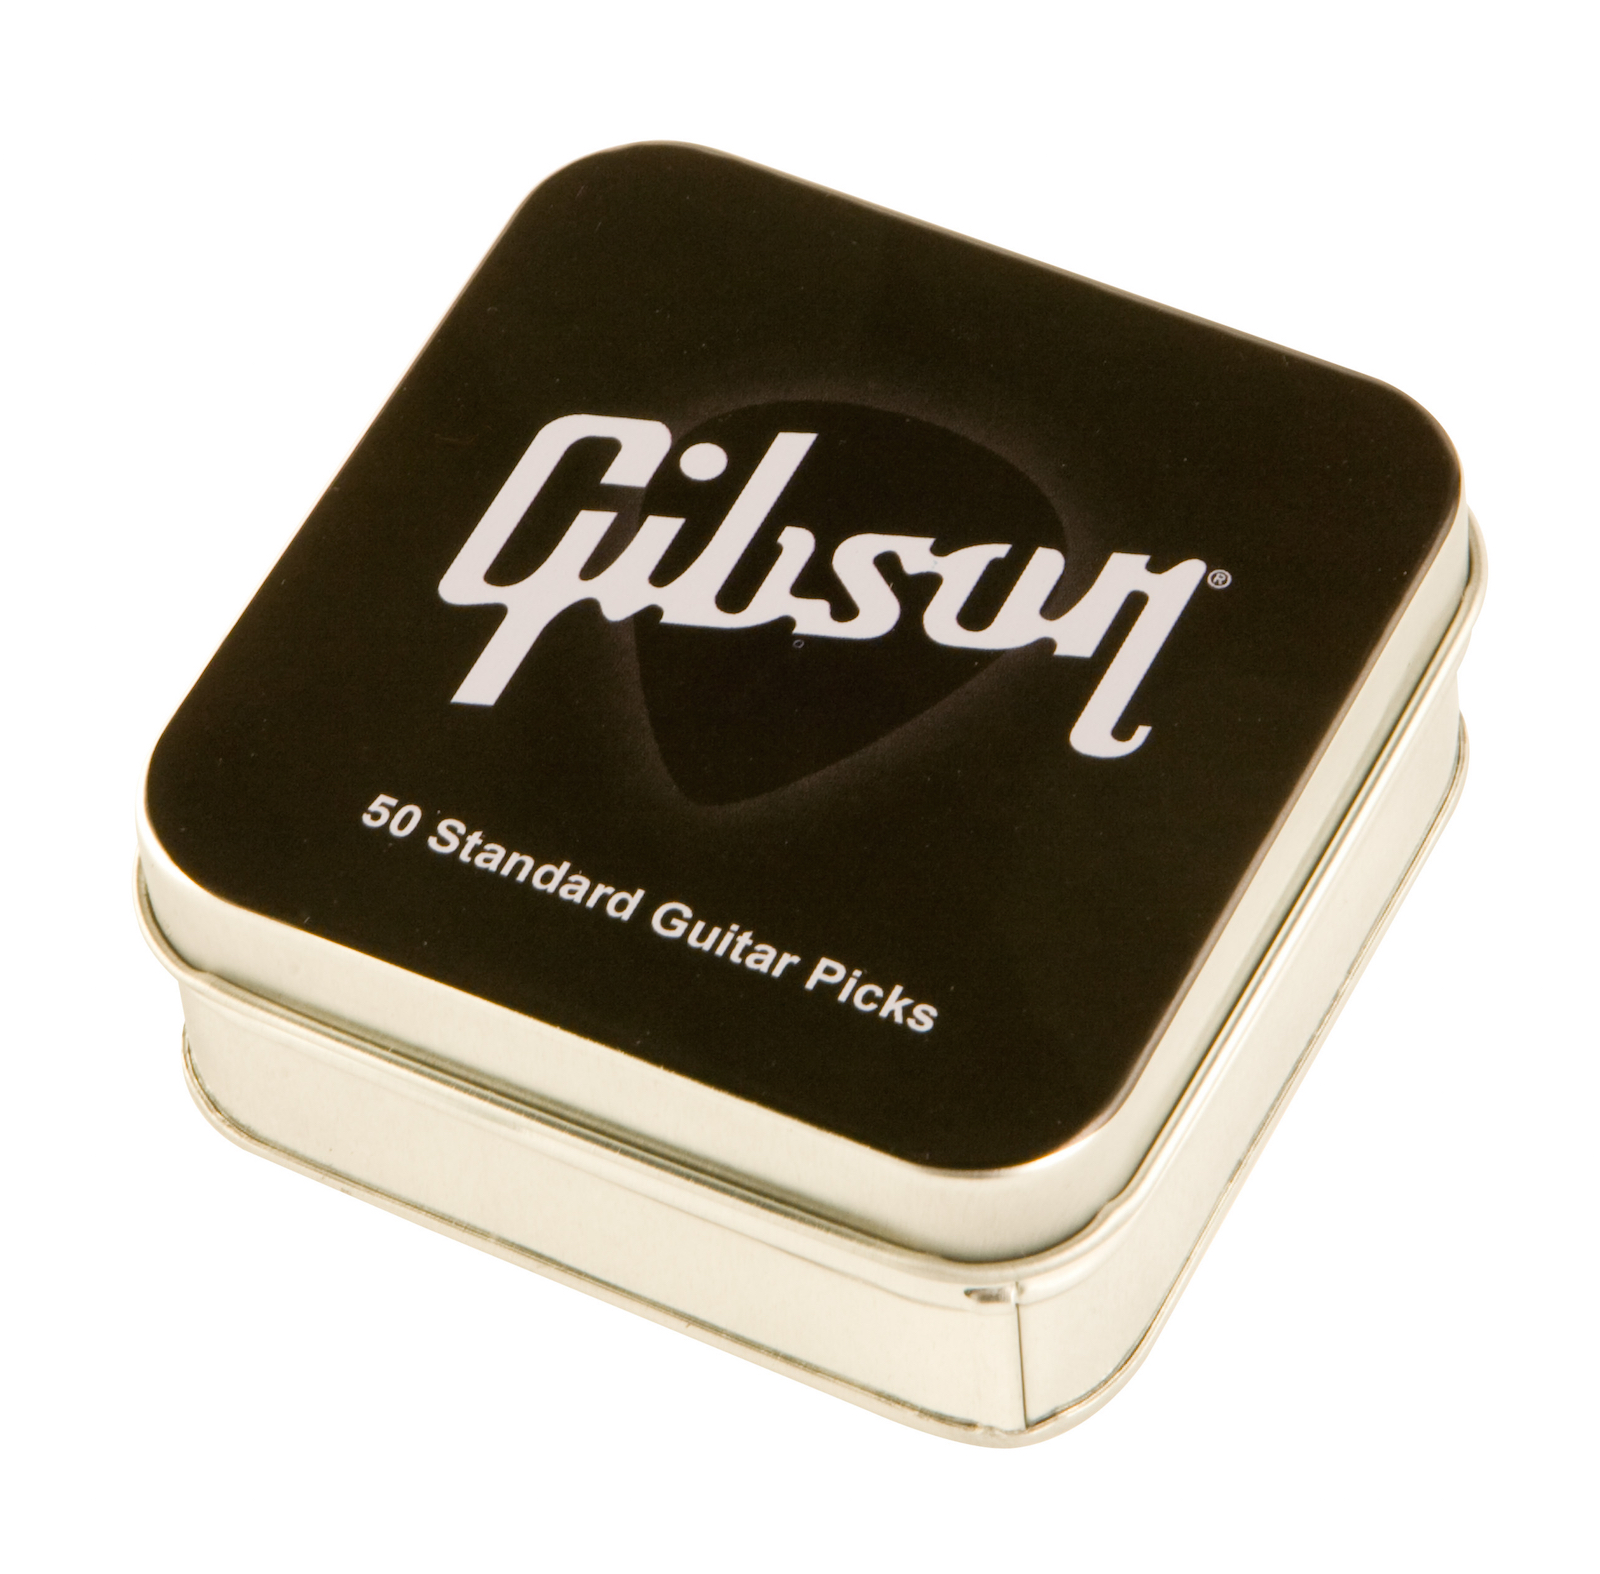 GIBSON ACCESSORIES PICKS STANDARD TIN 50 PACK BLACK EXTRA HEAVY